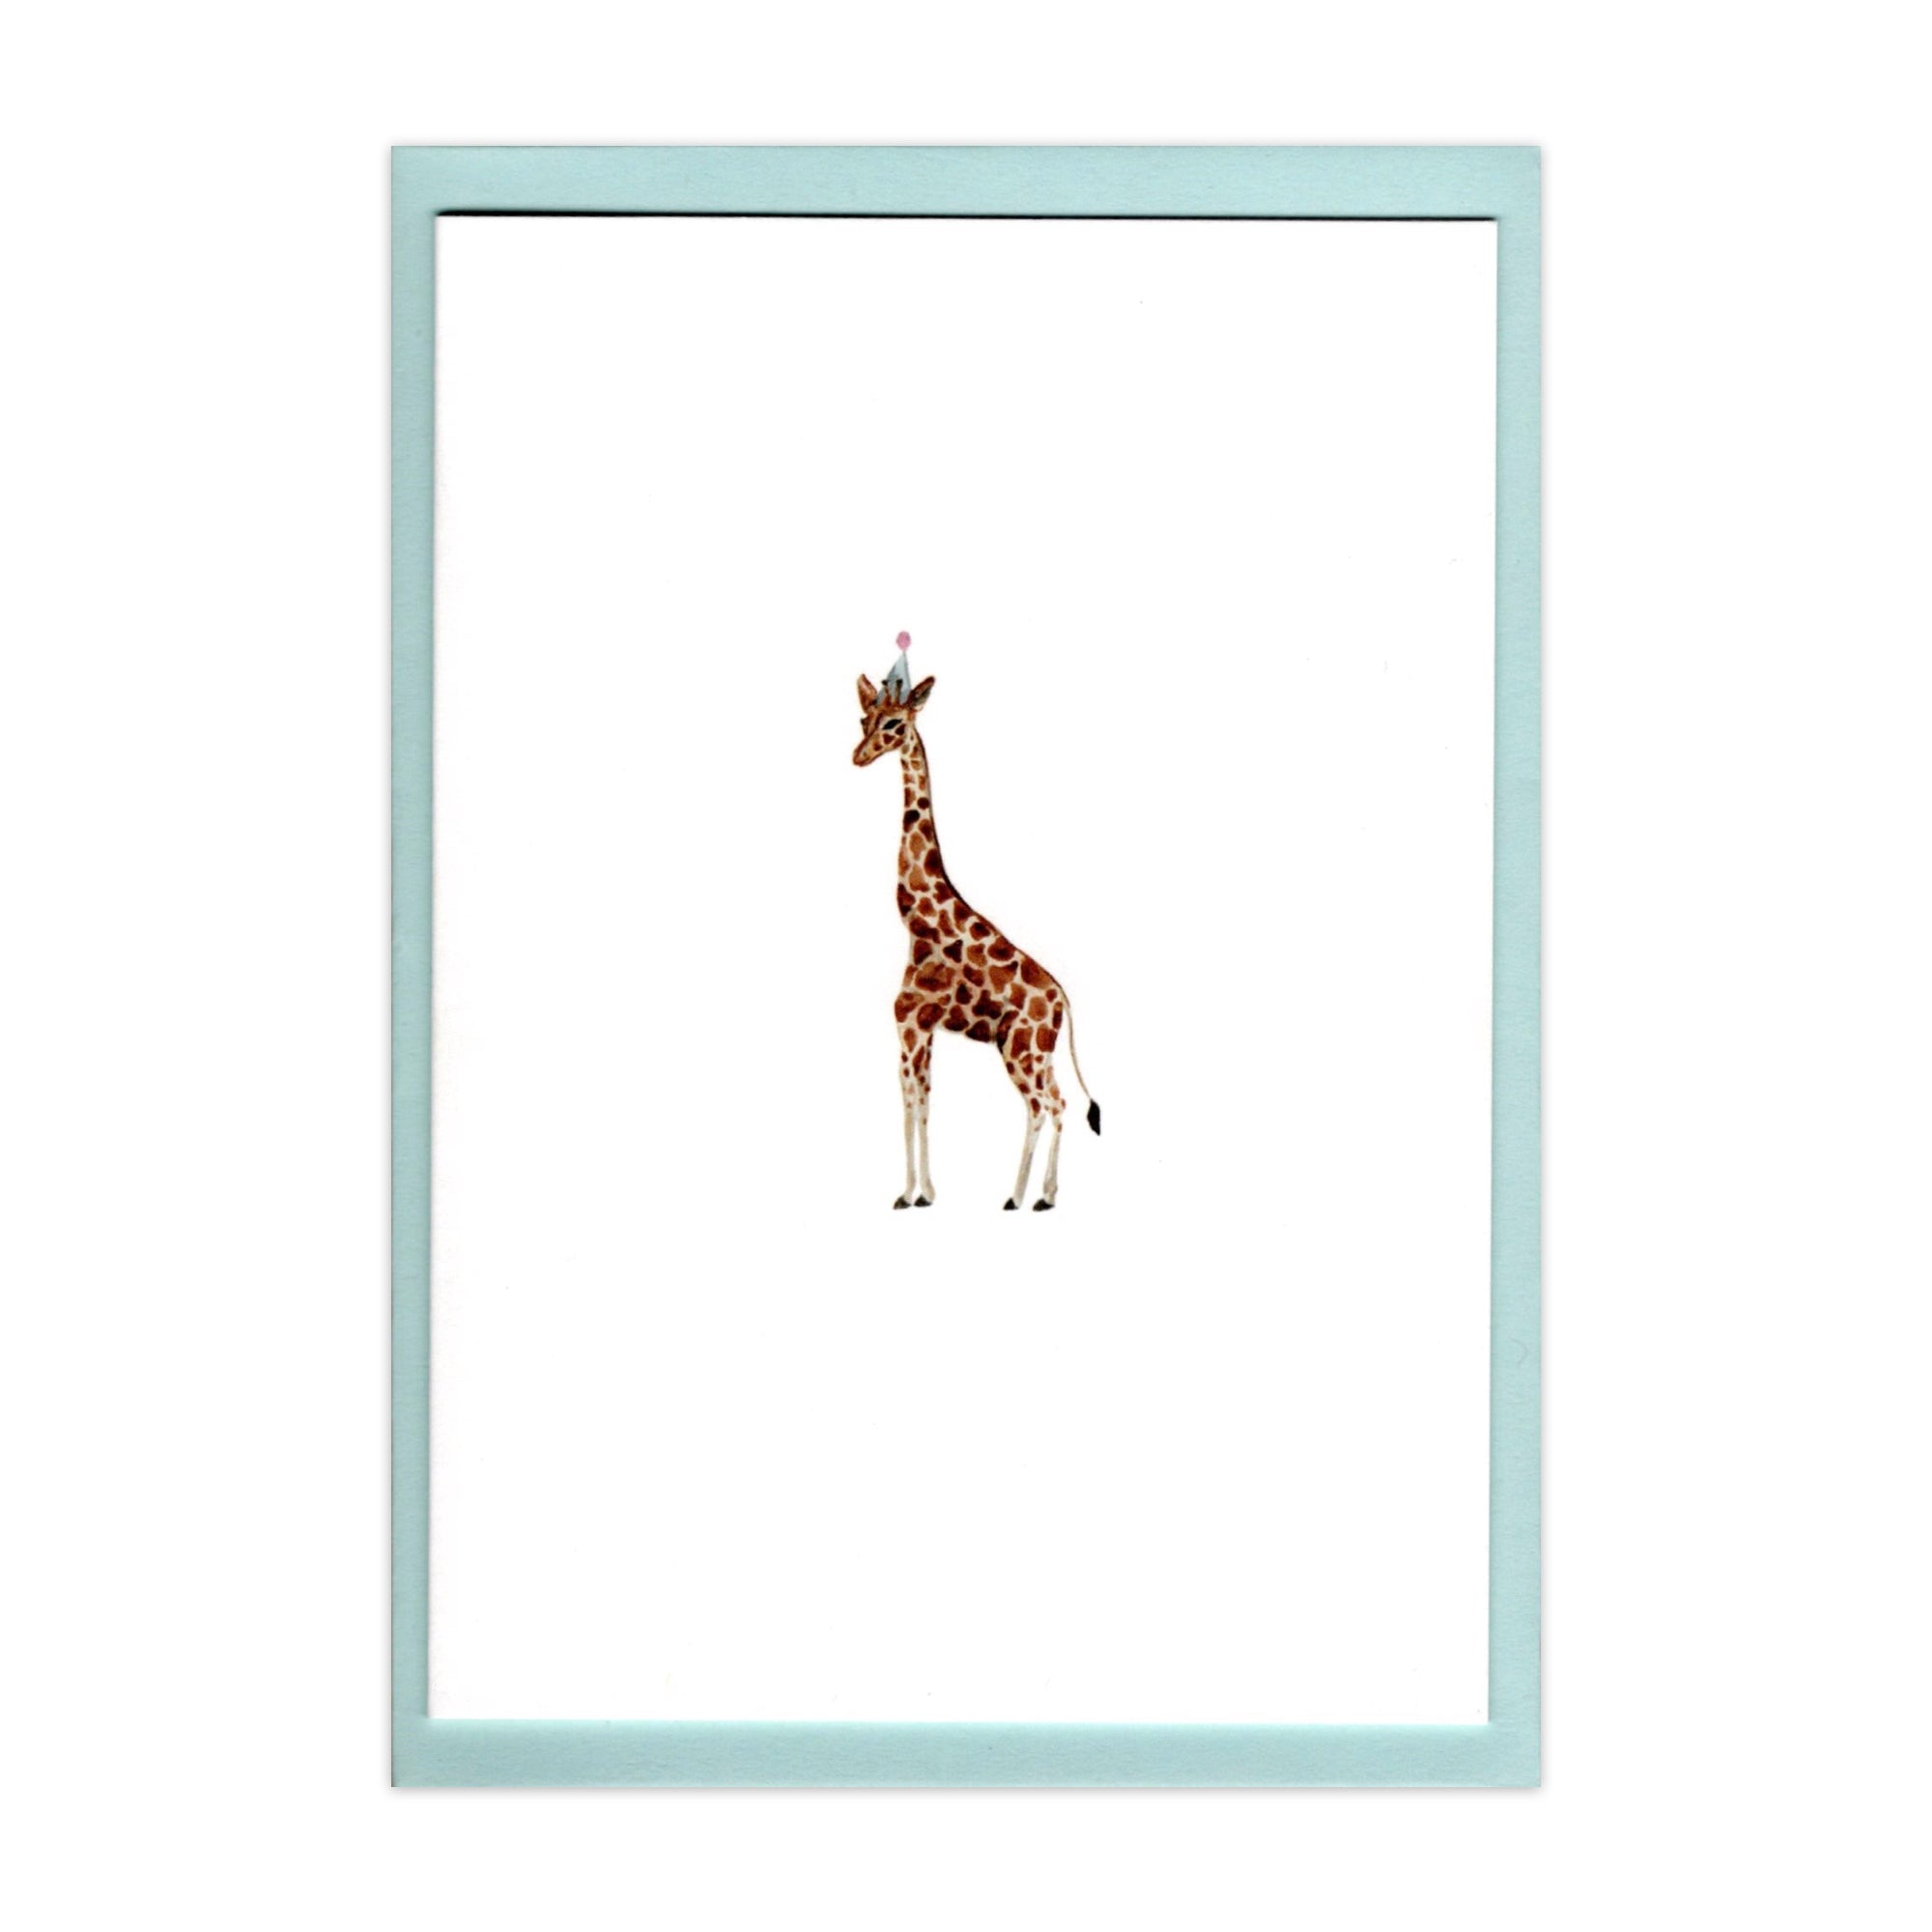 Greetings Card with a watercolour illustration of a giraffe in a party hat by Memo Press